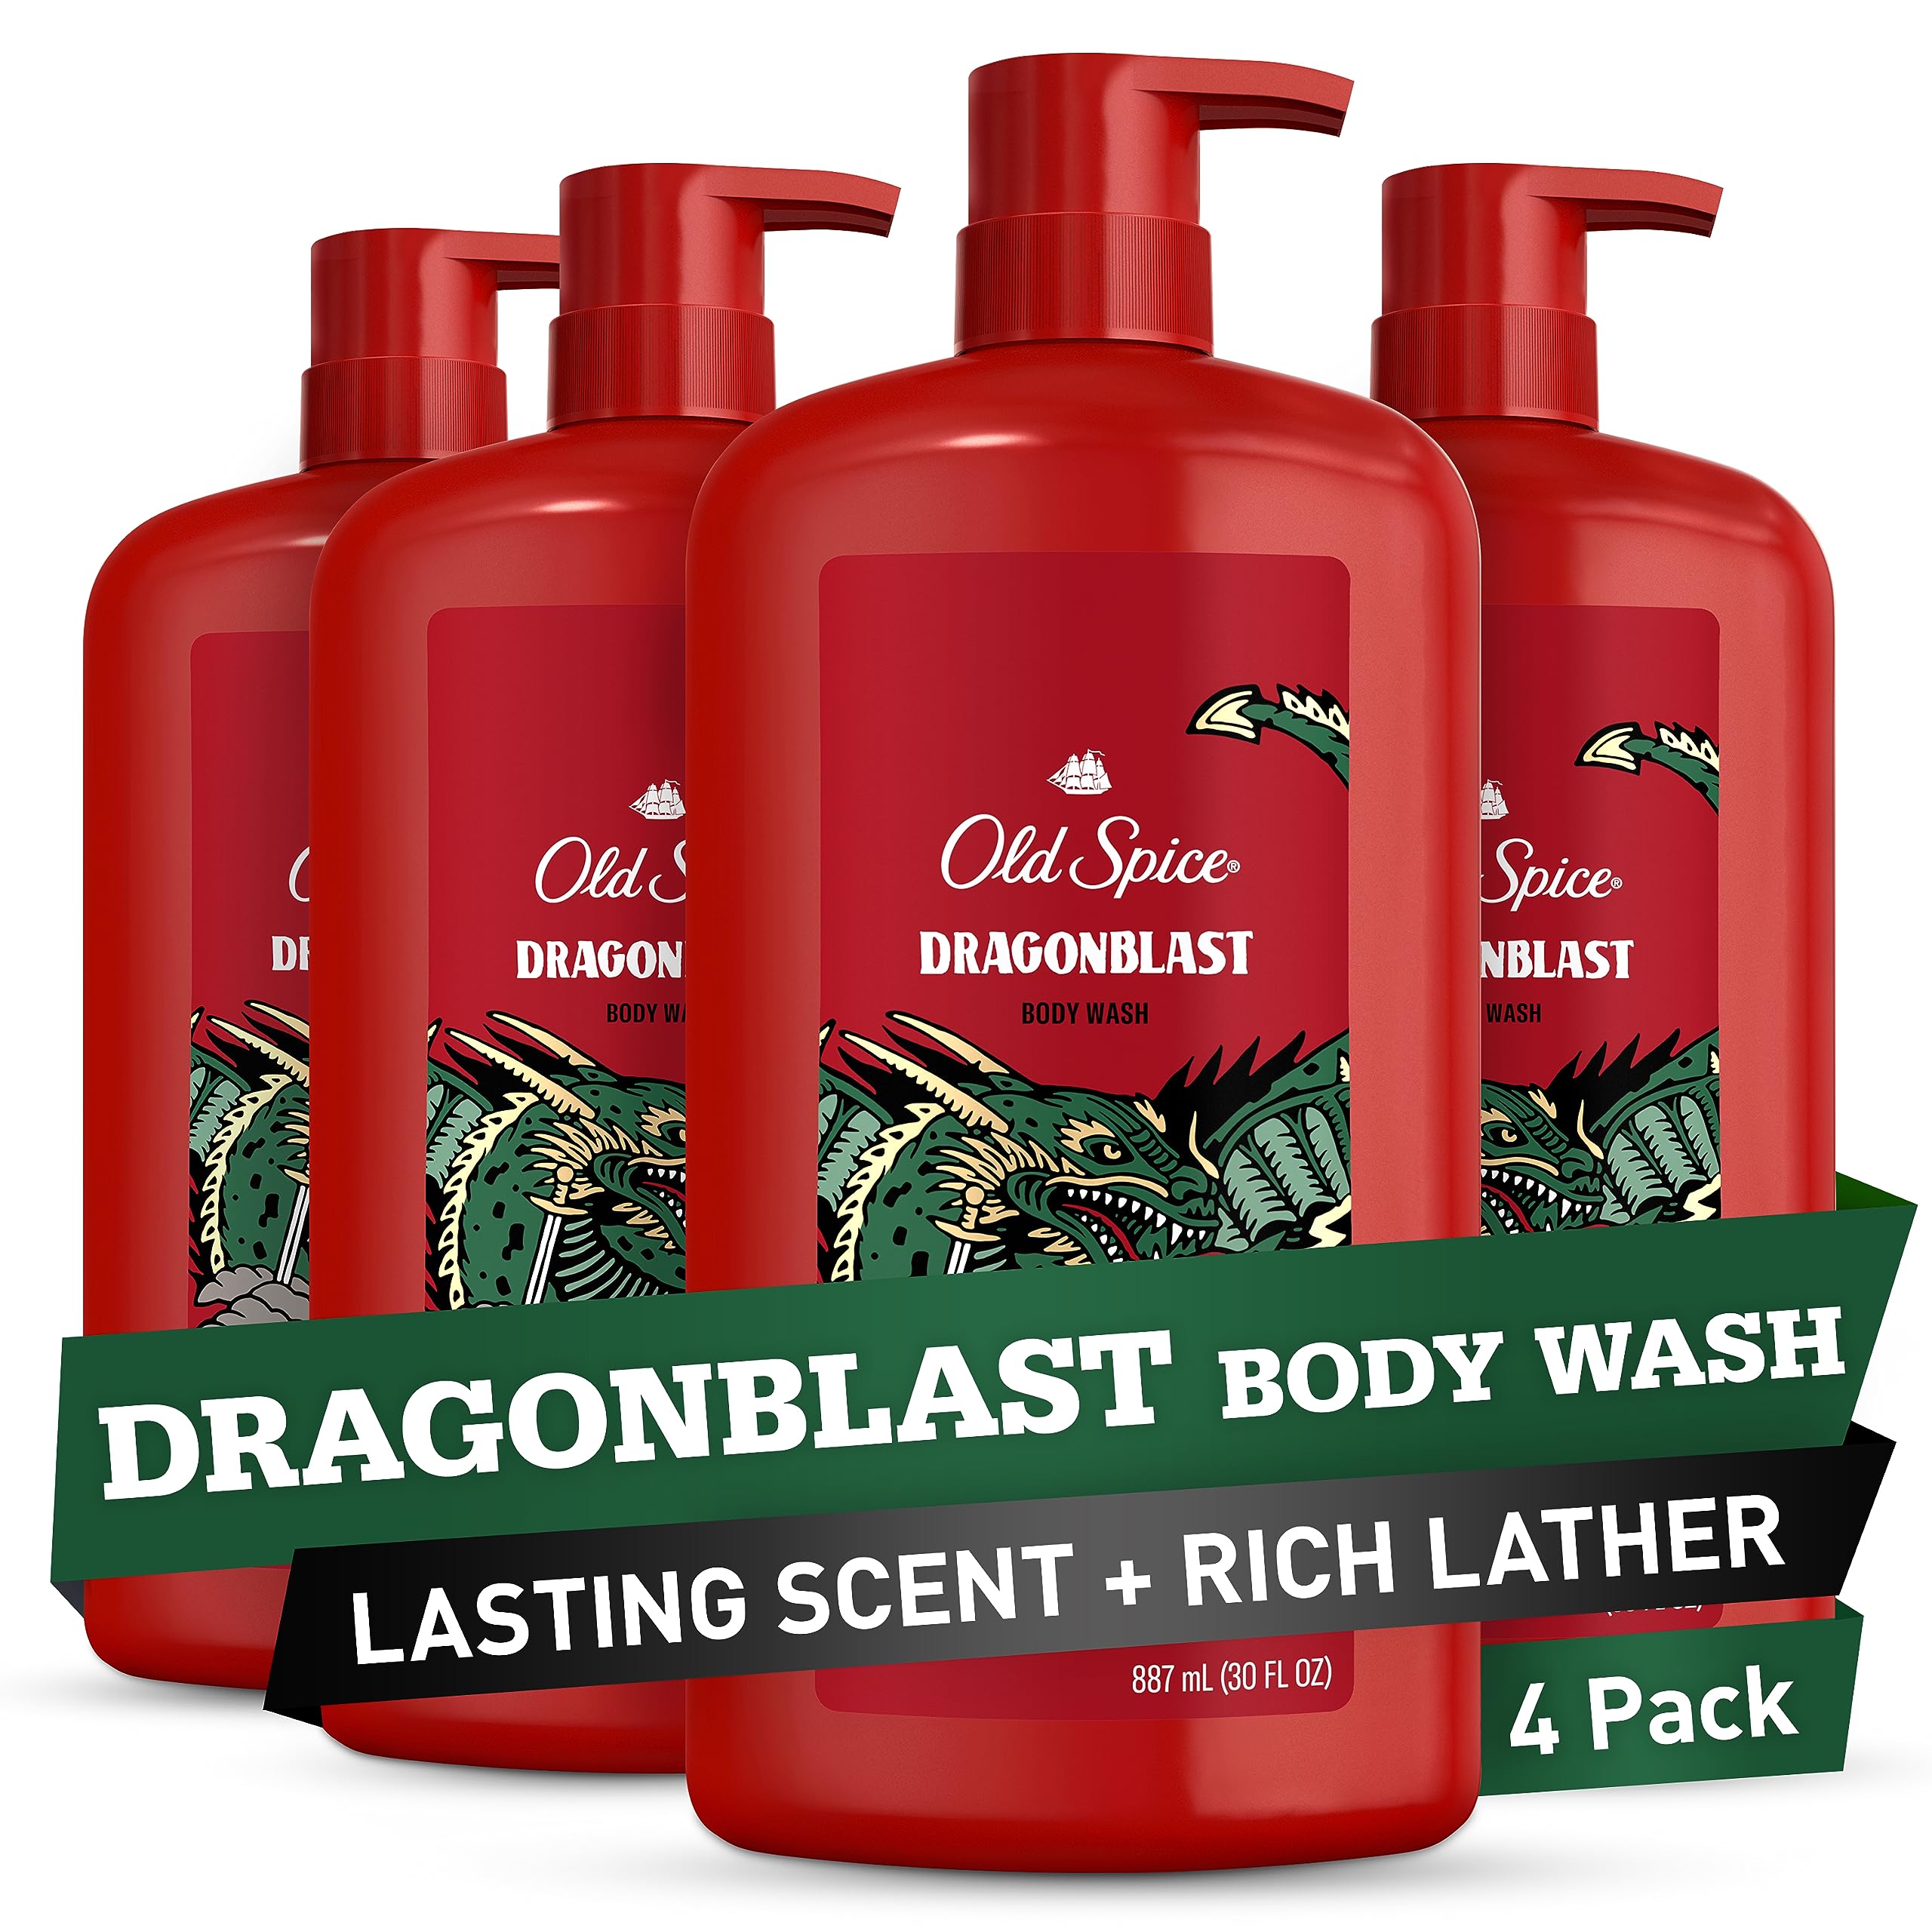 Old Spice Body Wash for Men, Dragonblast, Long Lasting Lather, 30 fl oz (Pack of 4)